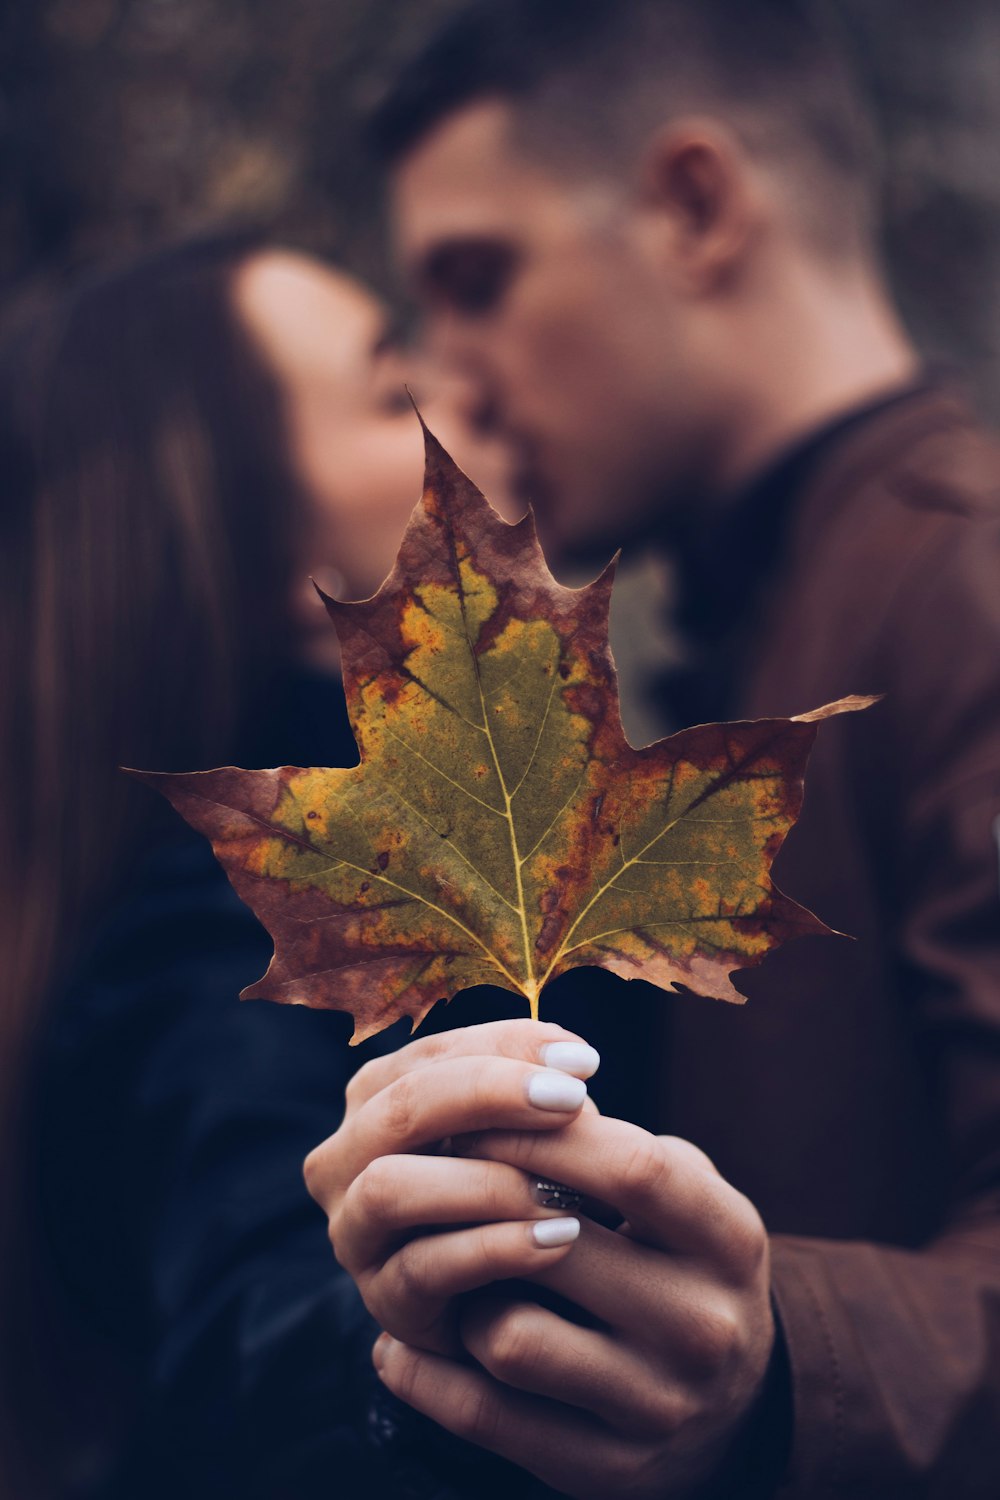 man and woman holding leaf while kissing